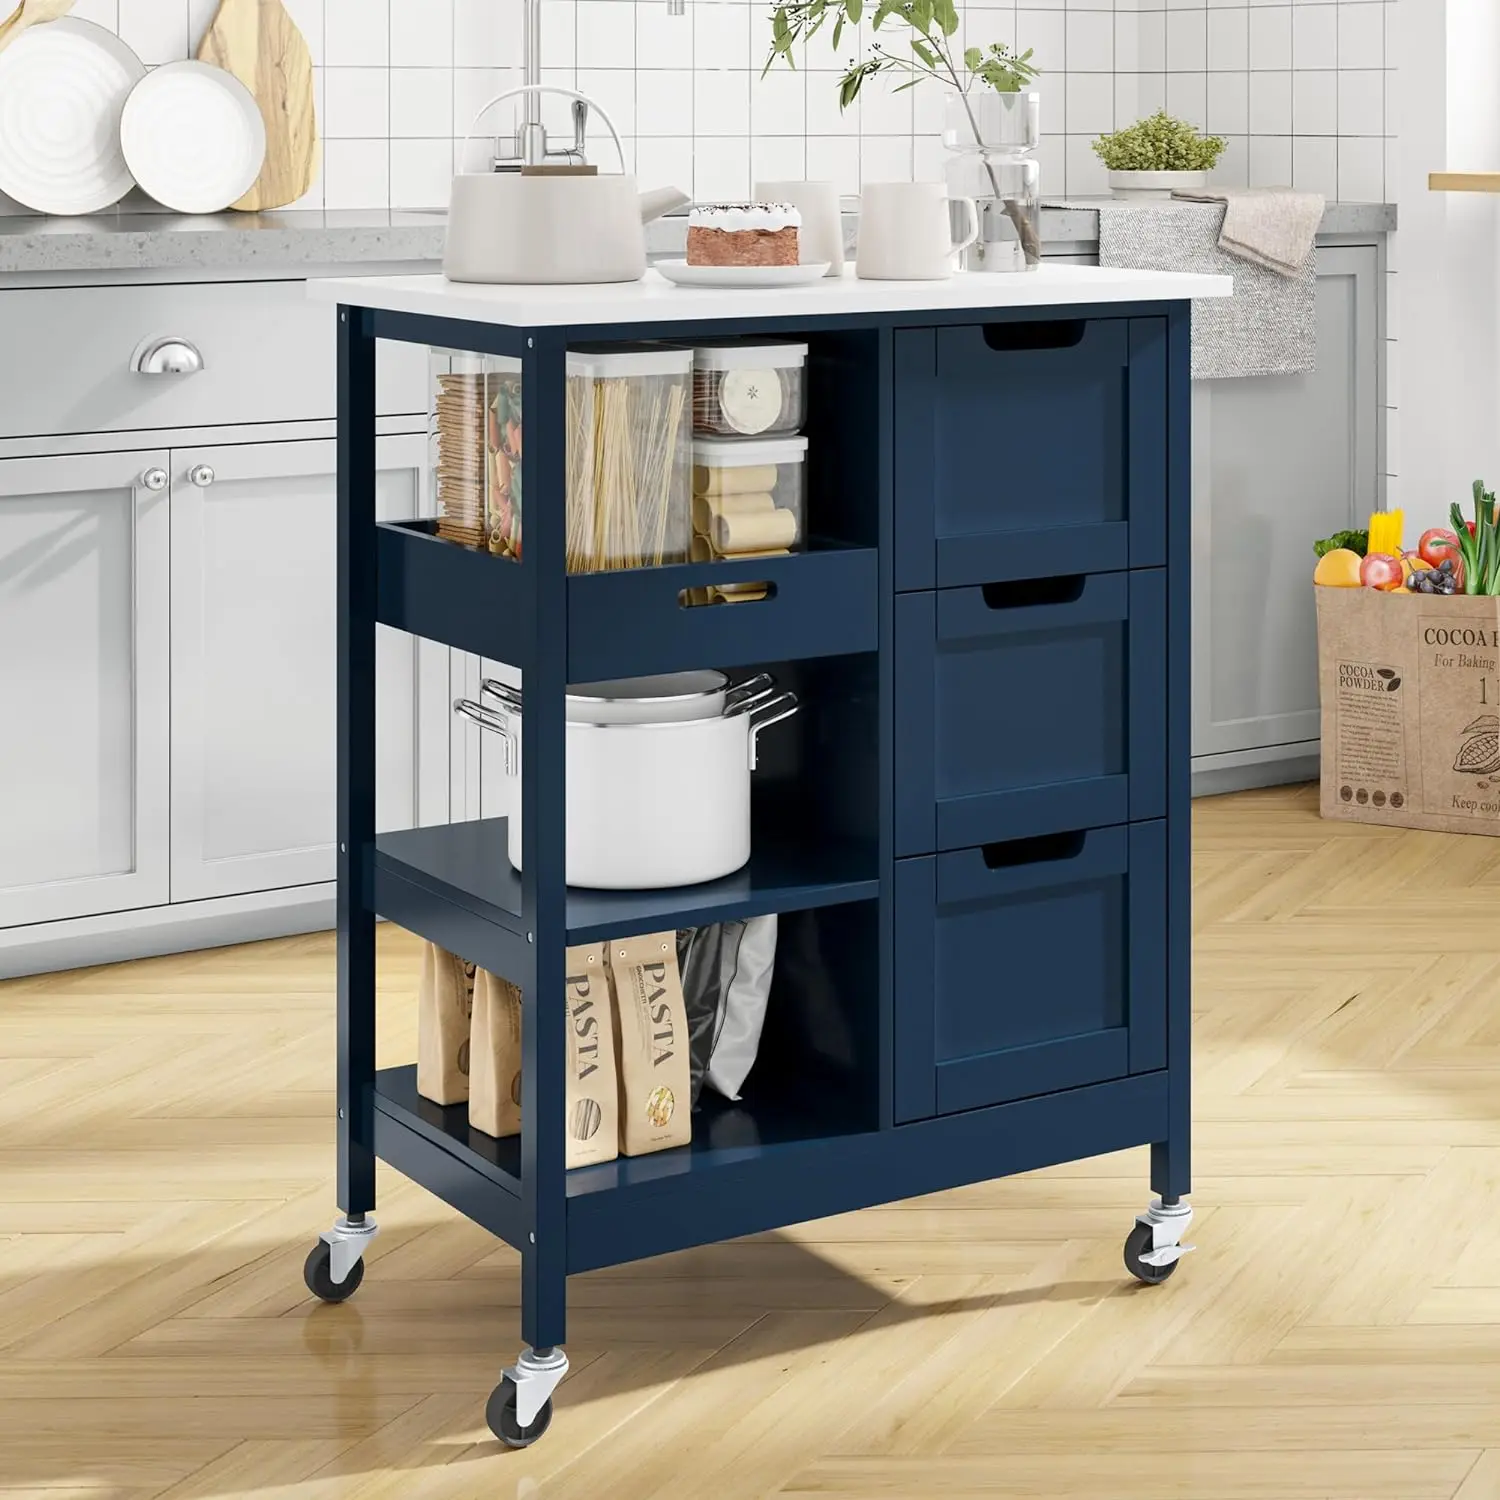 

YITAHOME Small Solid Wood Top Kitchen Island Cart on Wheels with Storage, Rolling Portable Dining Room Serving Utility Carts